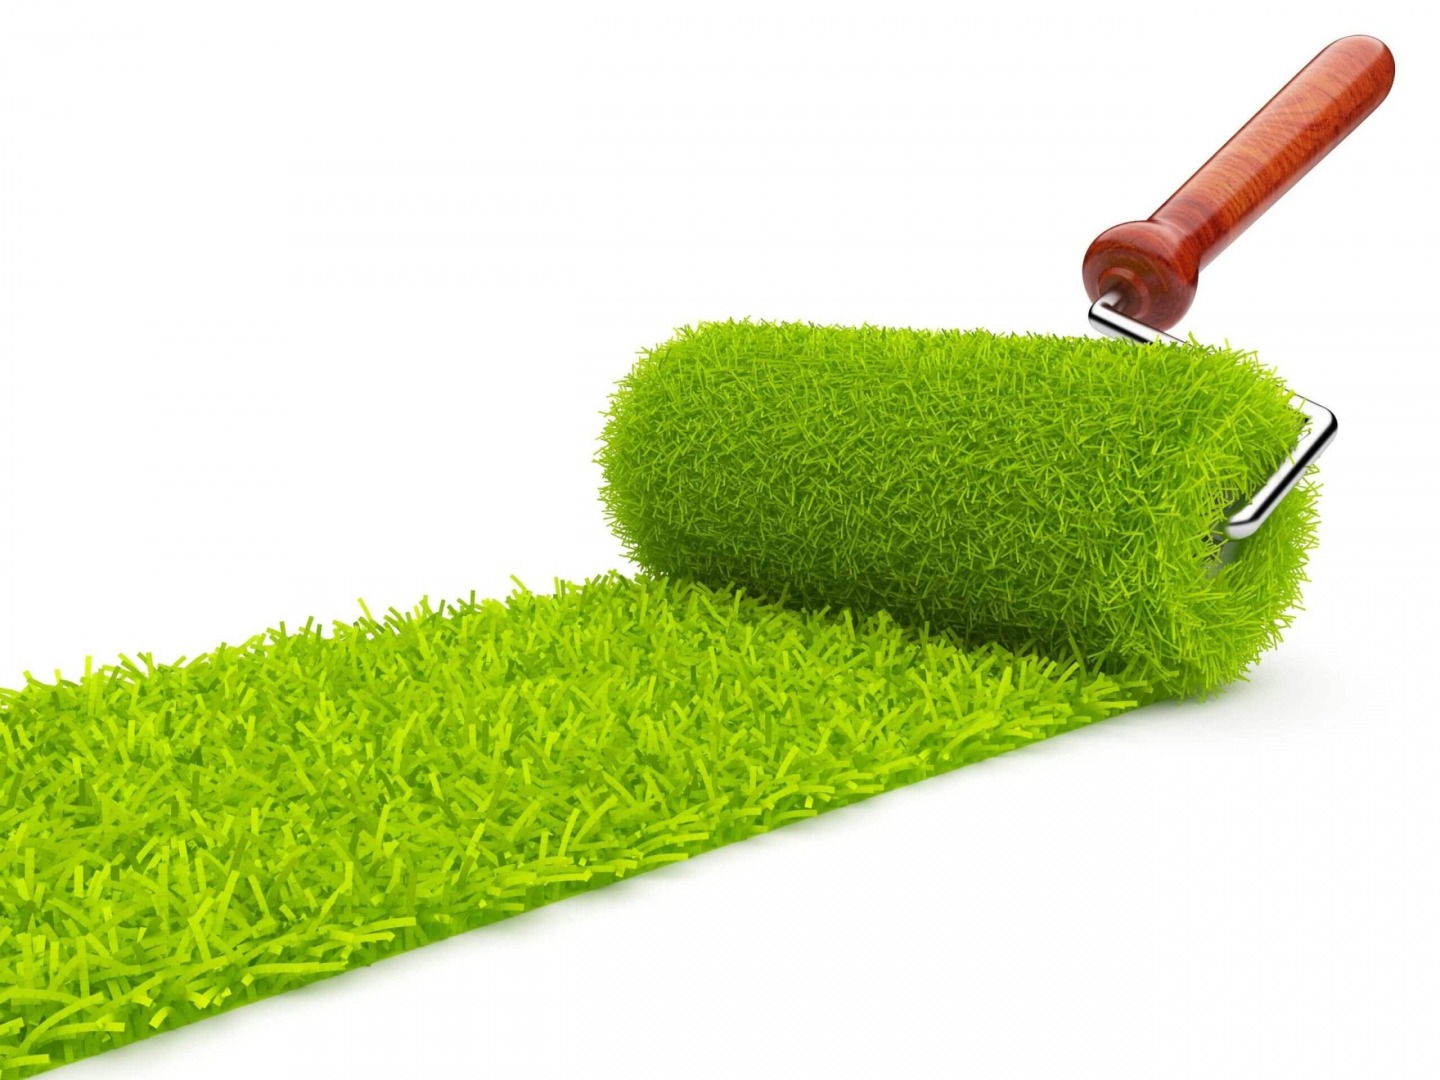 Environmental Marketing: The Troubling Trend of Greenwashing in Companies Today